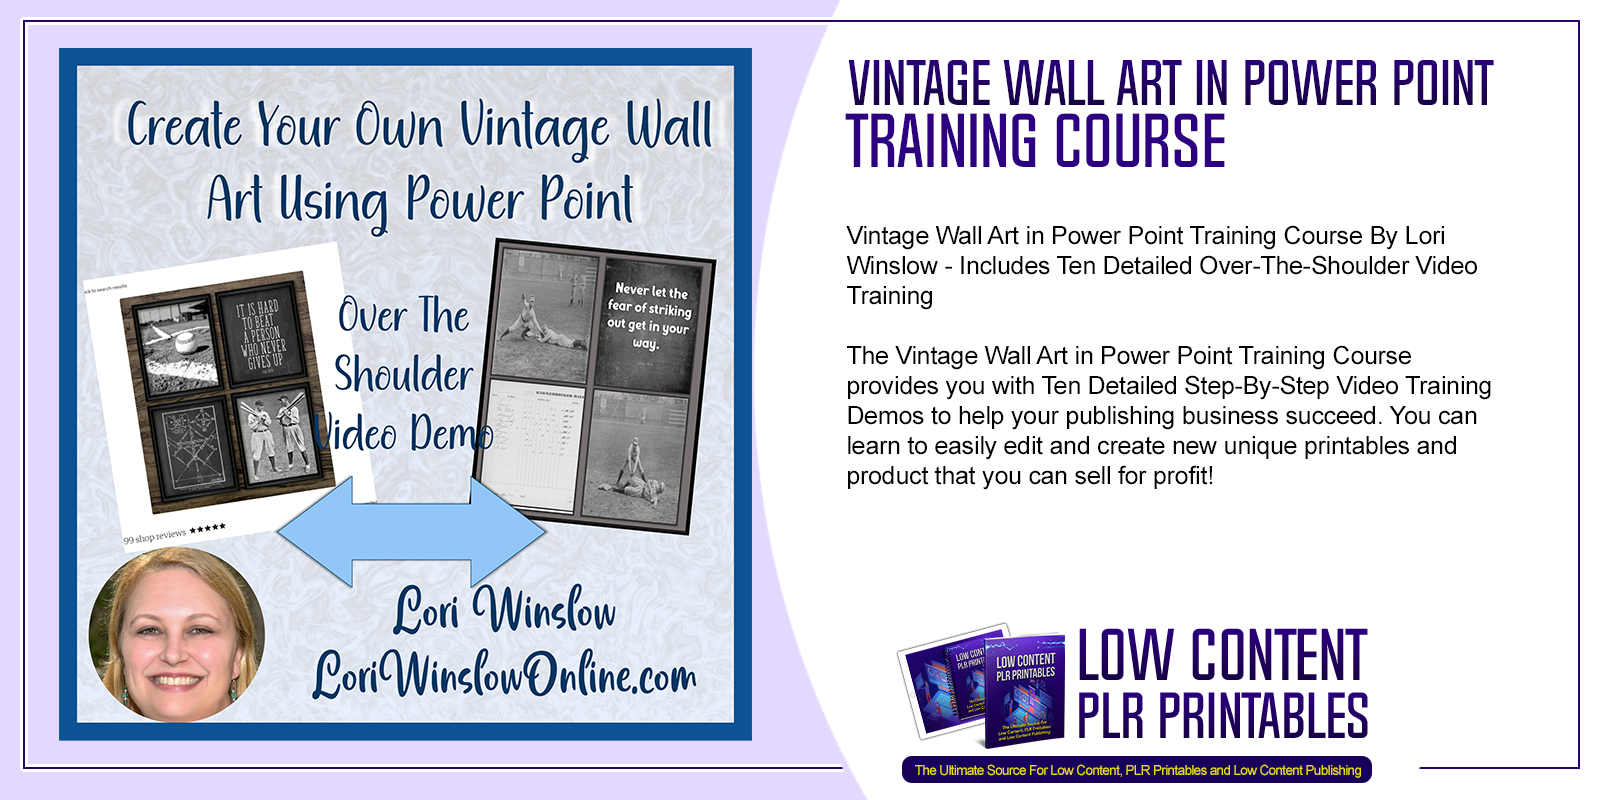 Vintage Wall Art in Power Point Training Course